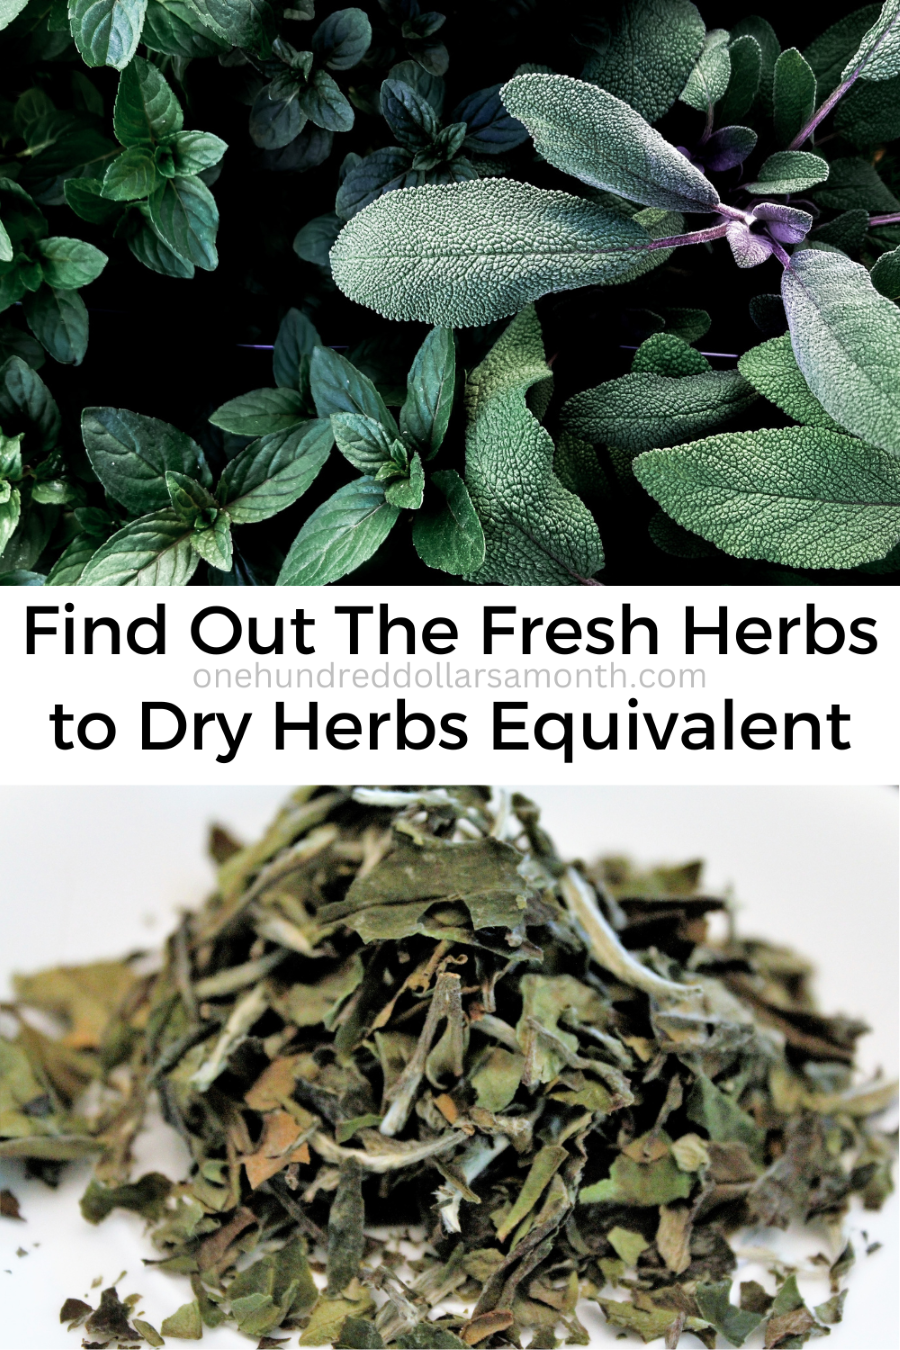 Fresh Herbs to Dry Herbs Equivalent